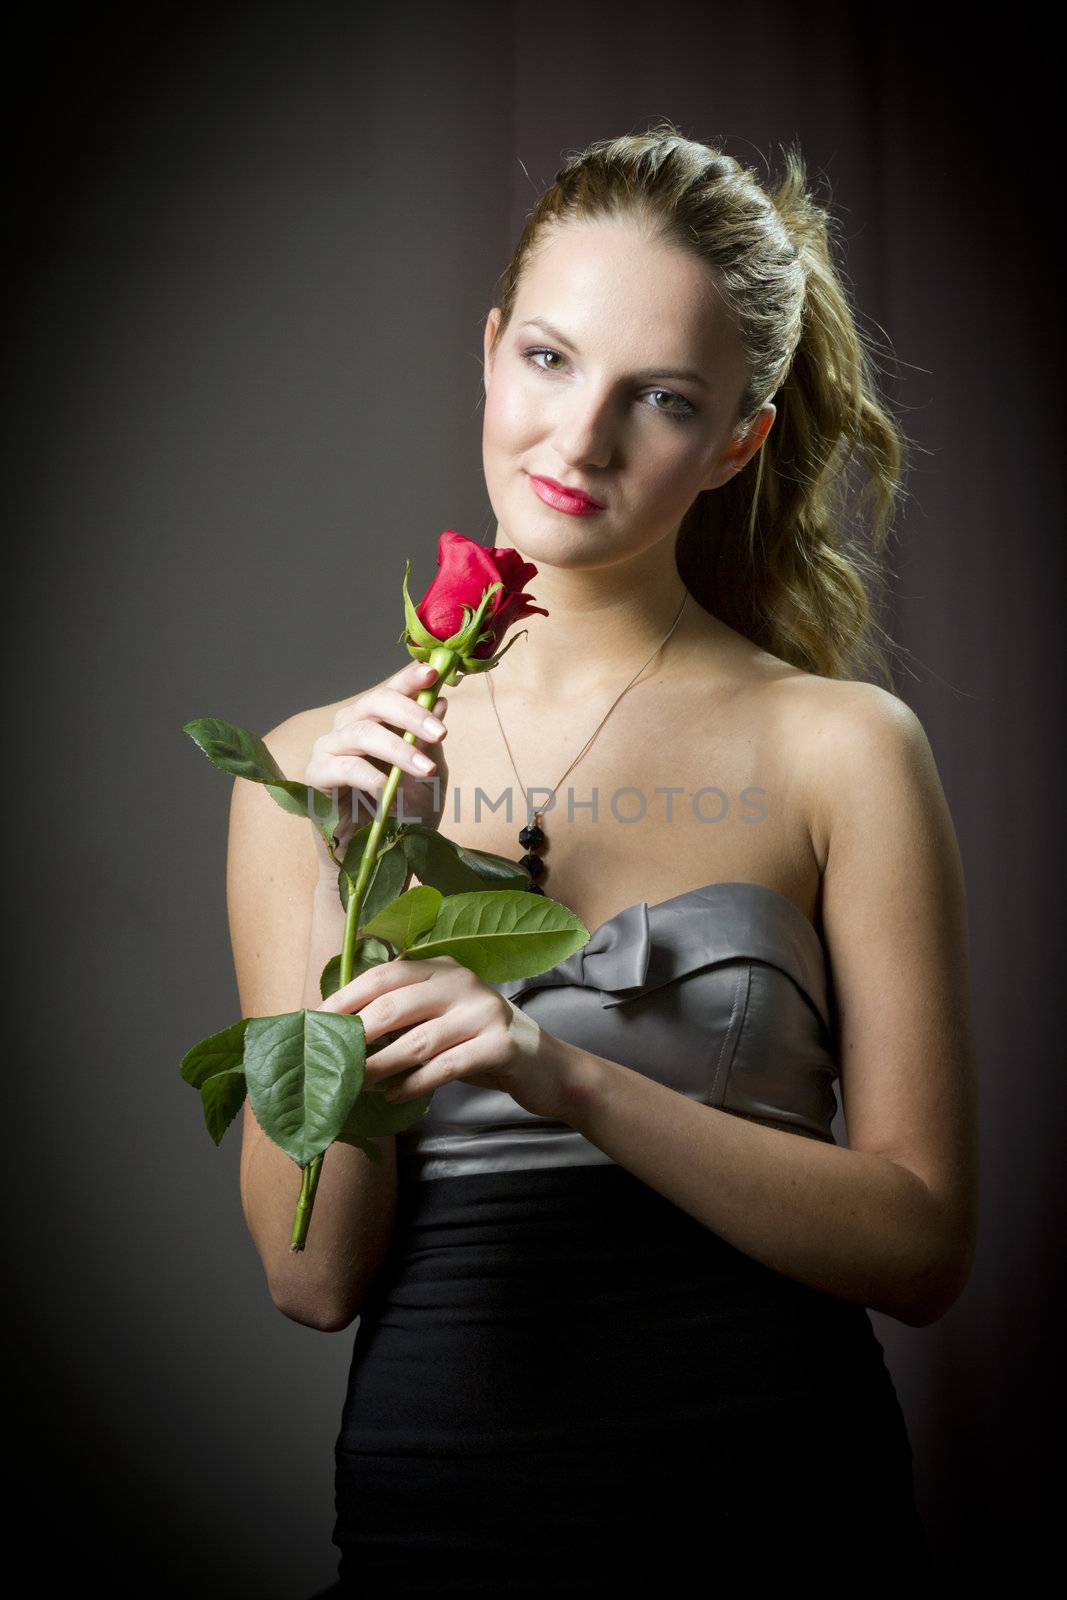 Attractive woman holding a rose on Valentine's day,